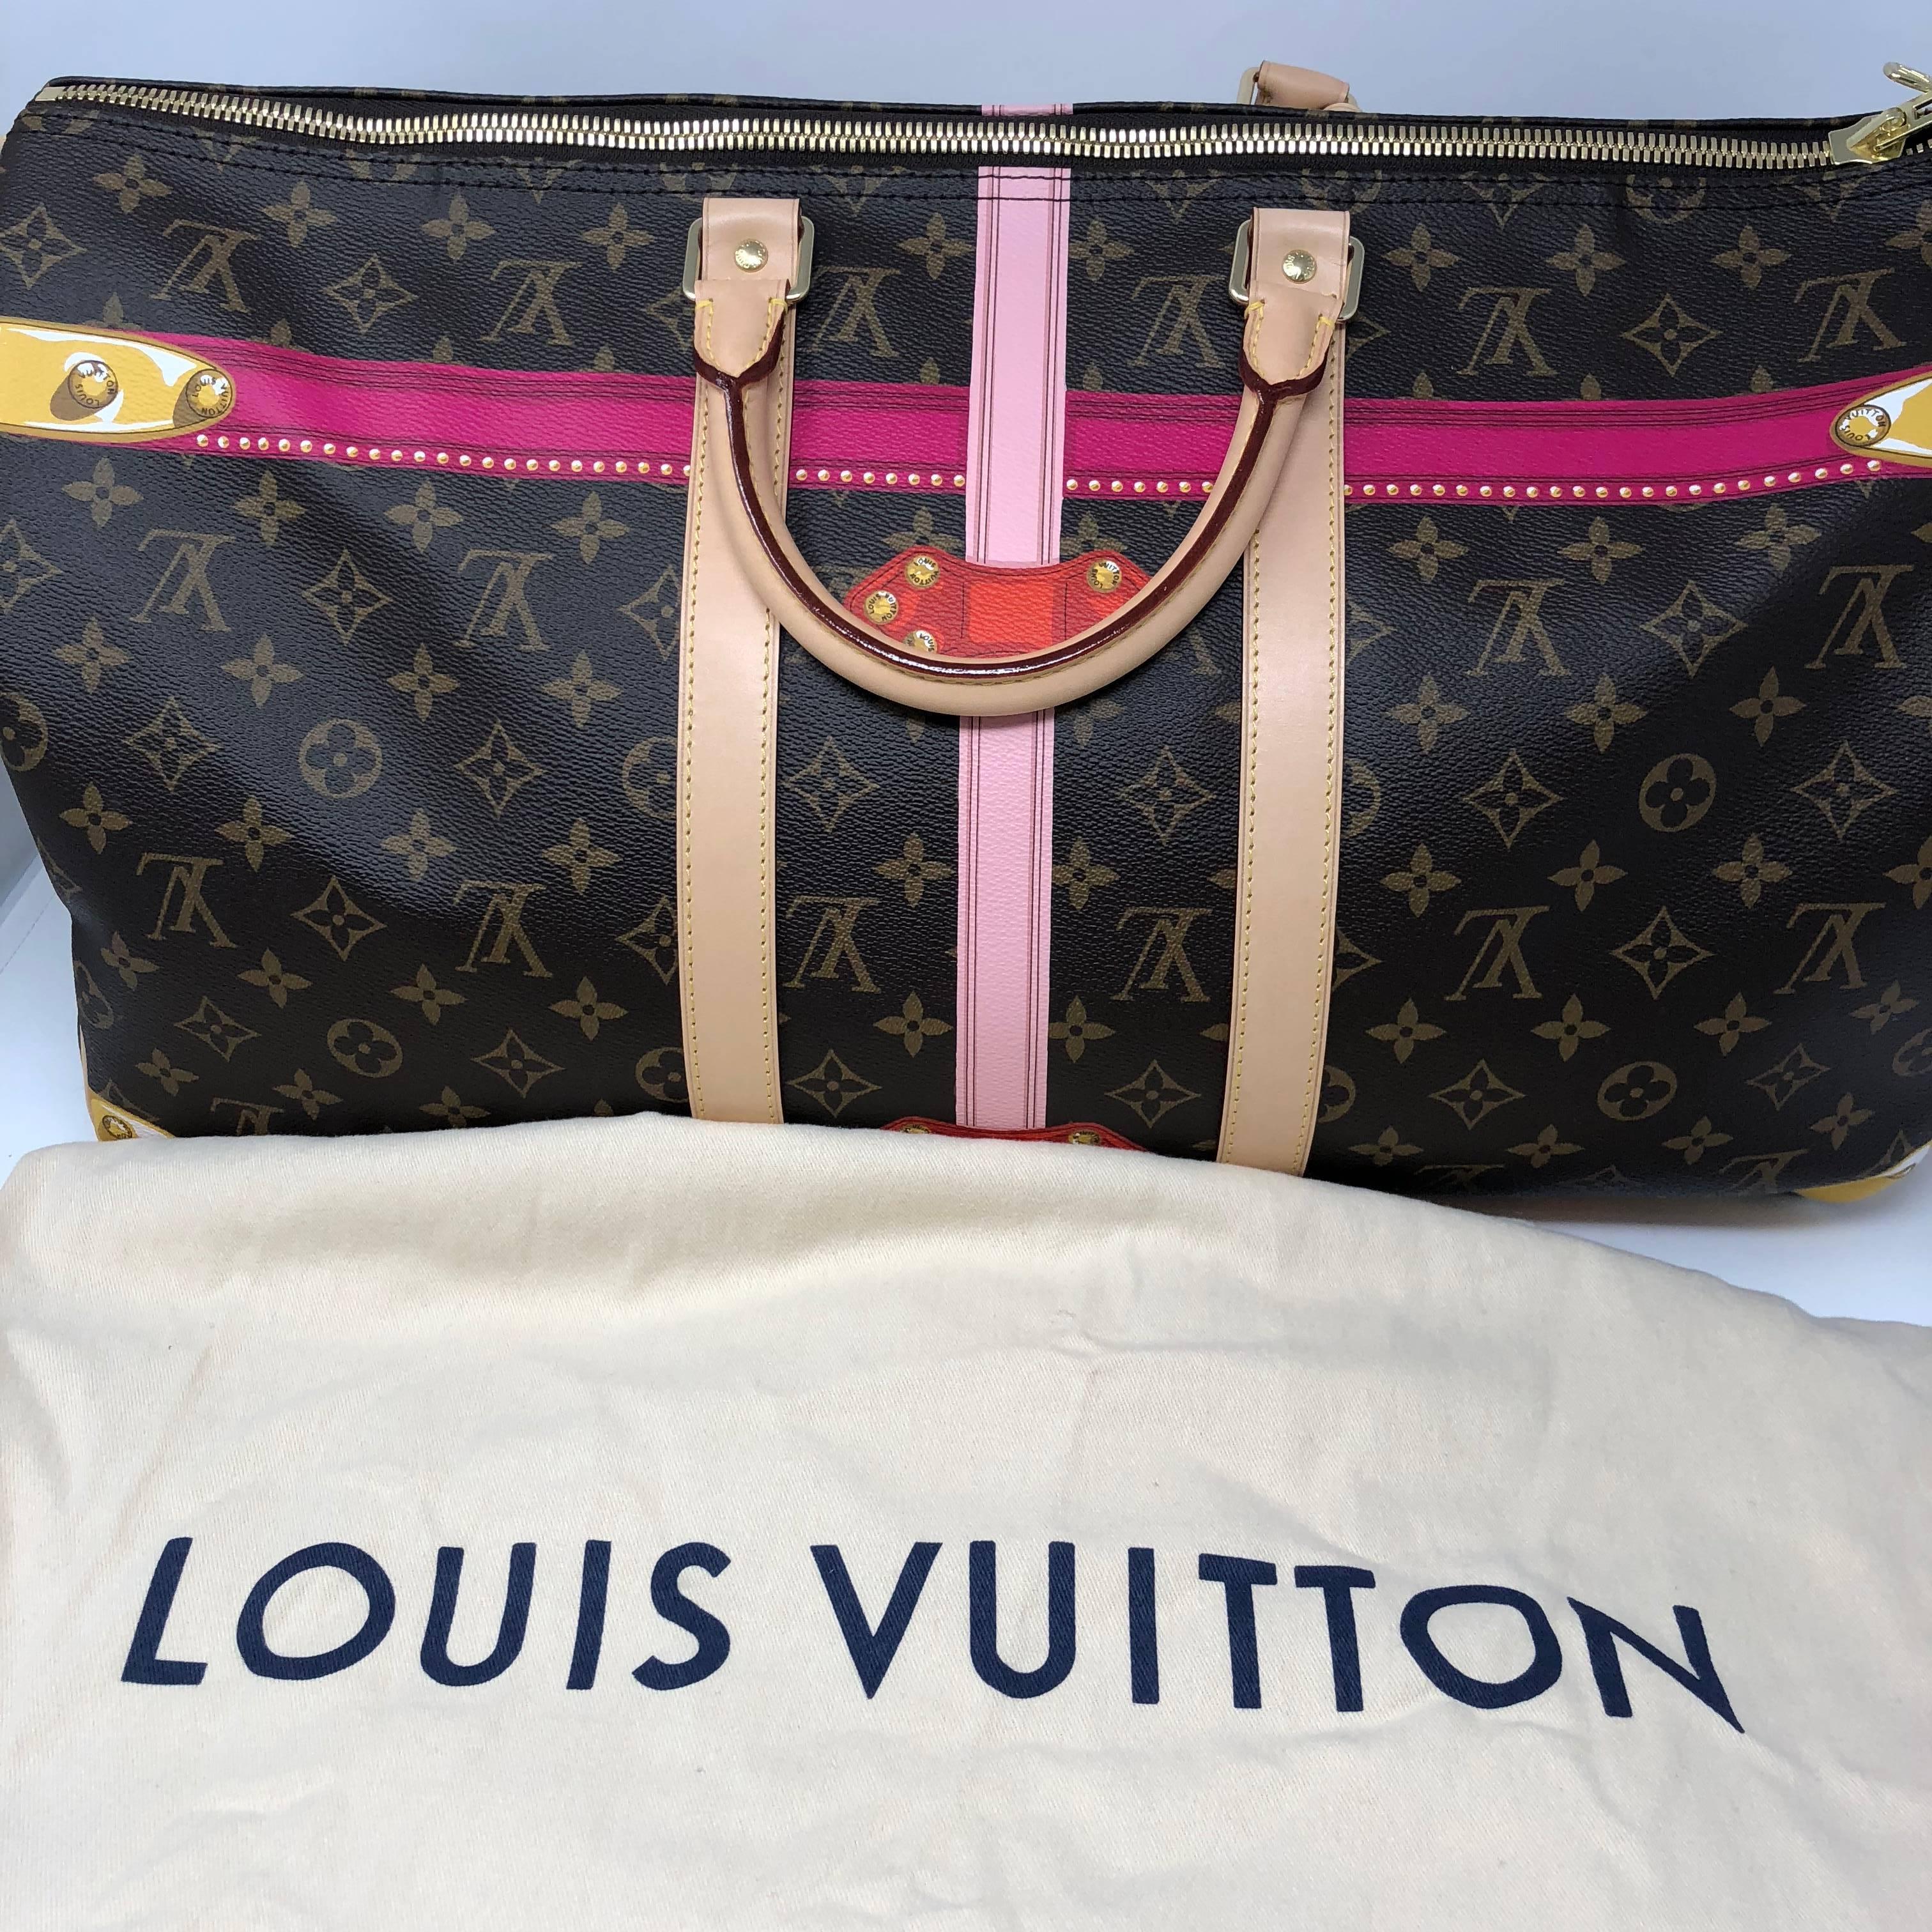 Louis Vuitton Keepall Limited Edition Trunks, 2018 3